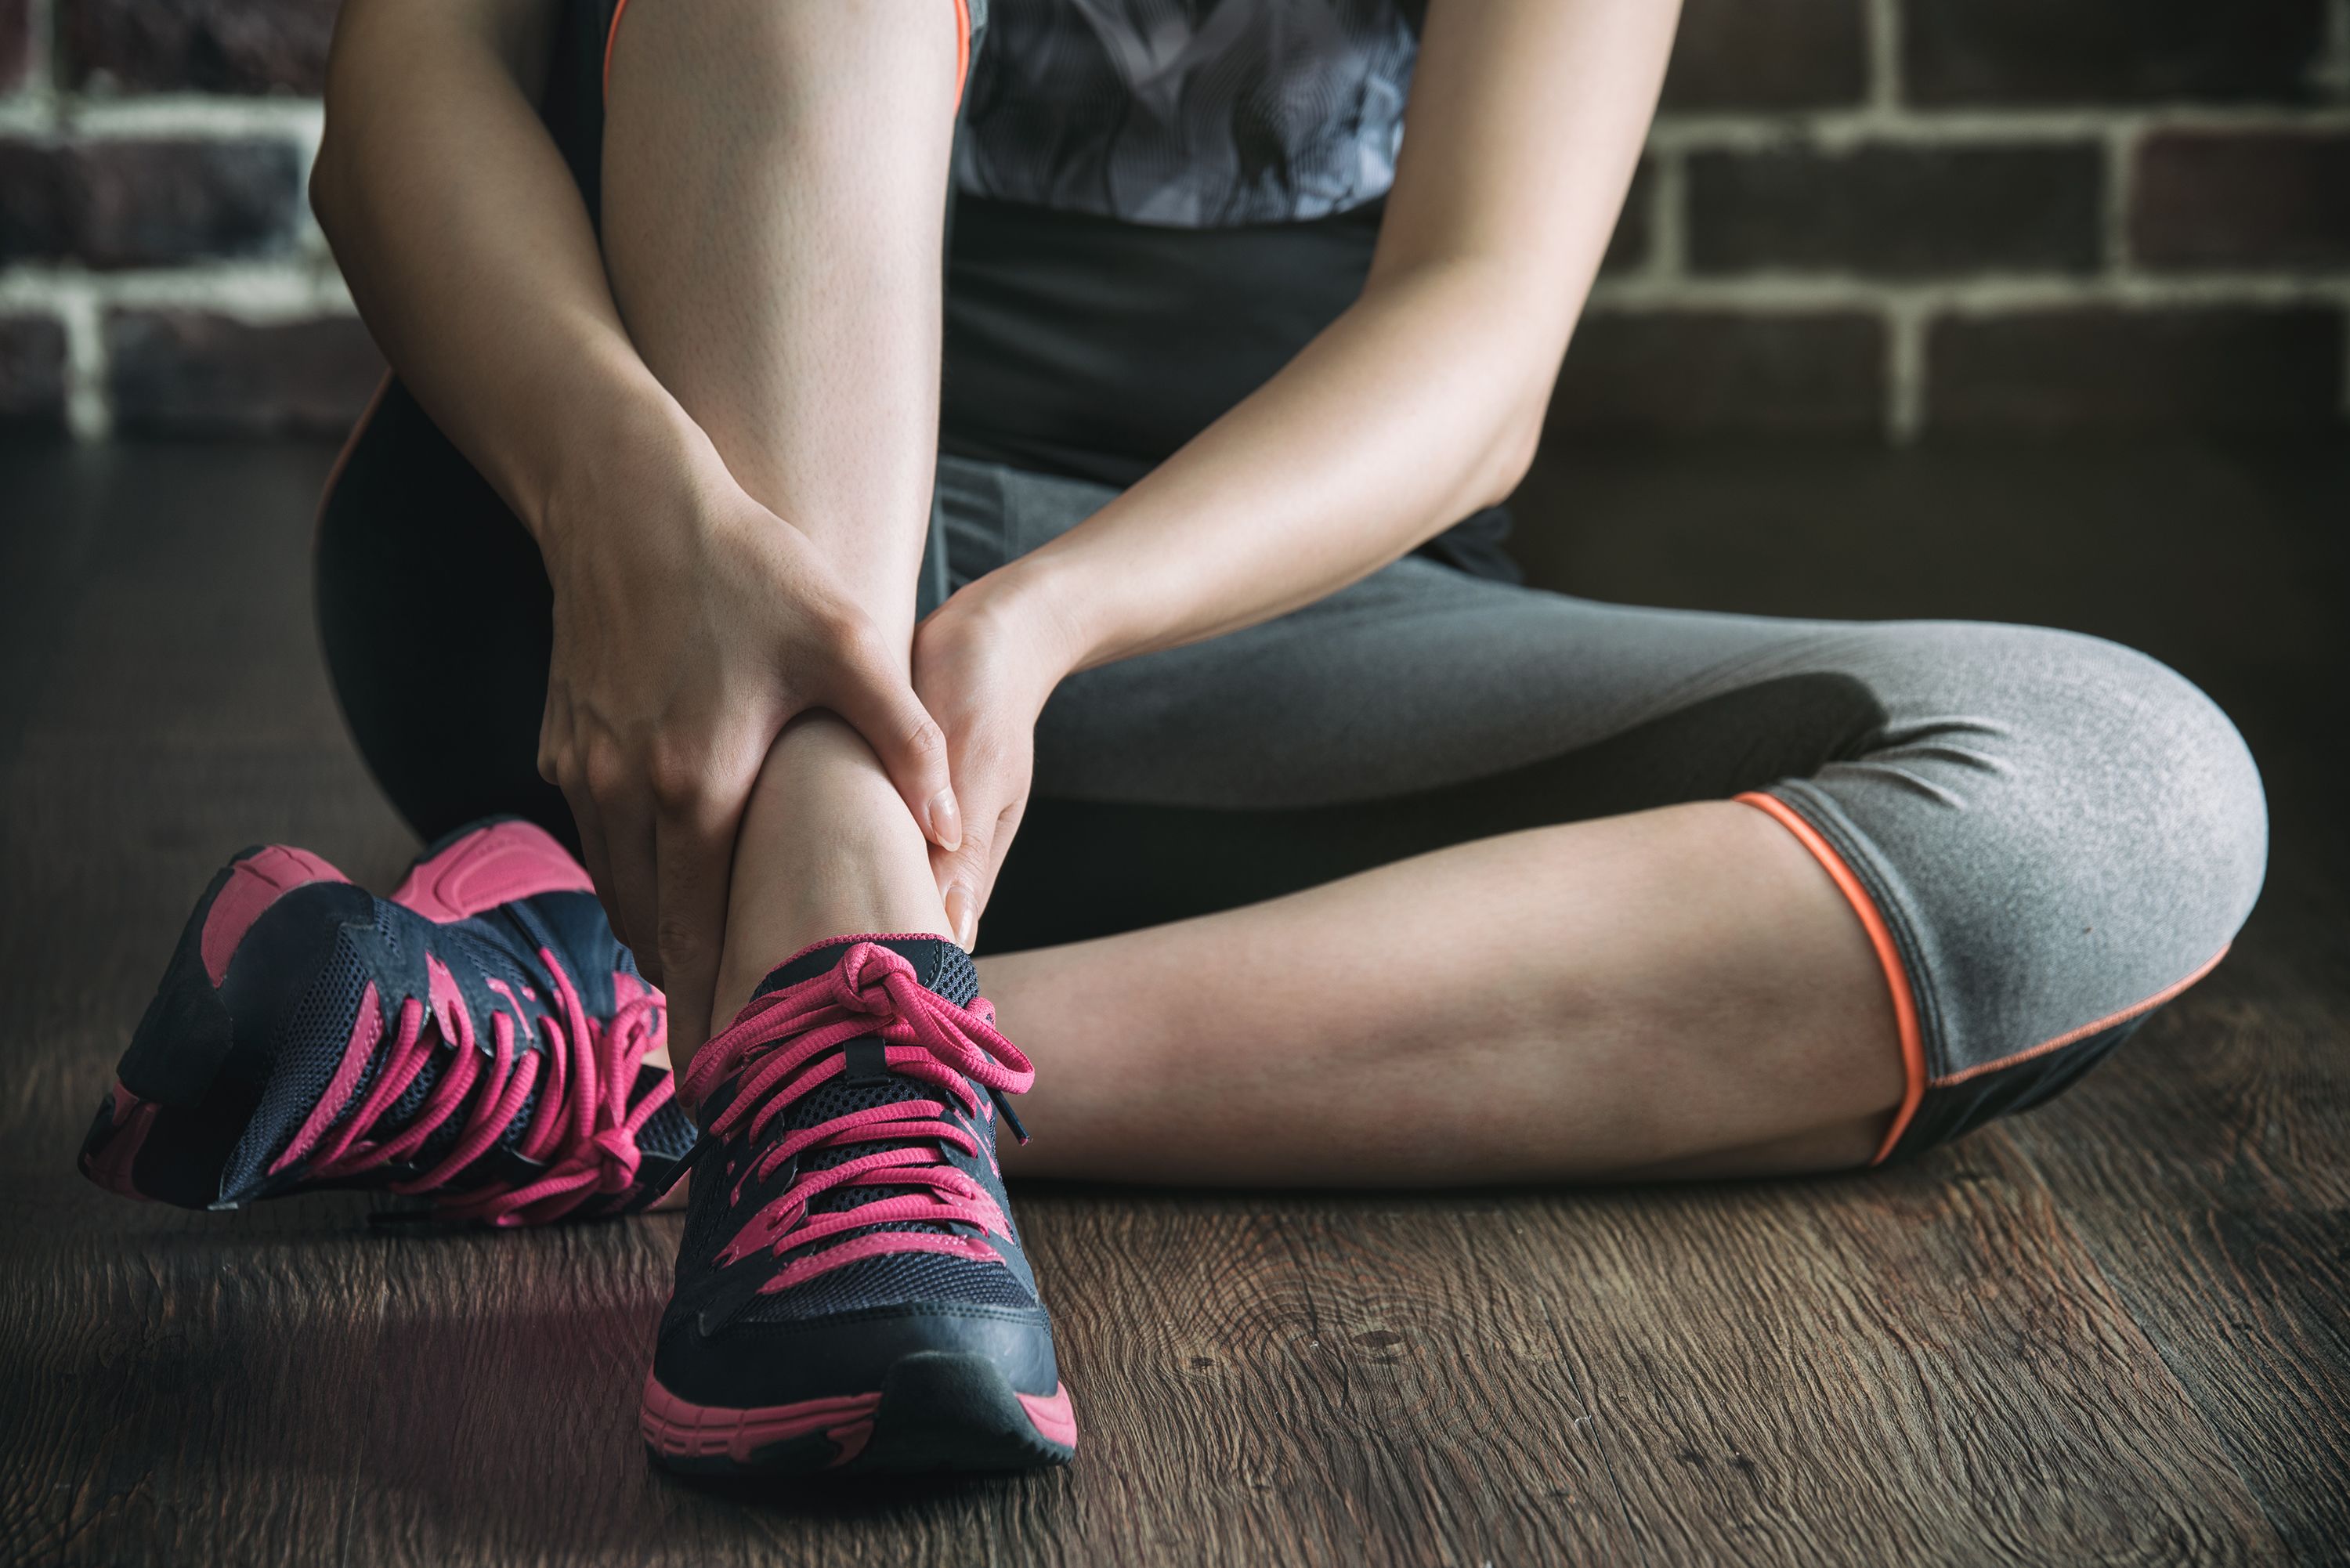 How to avoid soft tissue injuries, according to experts